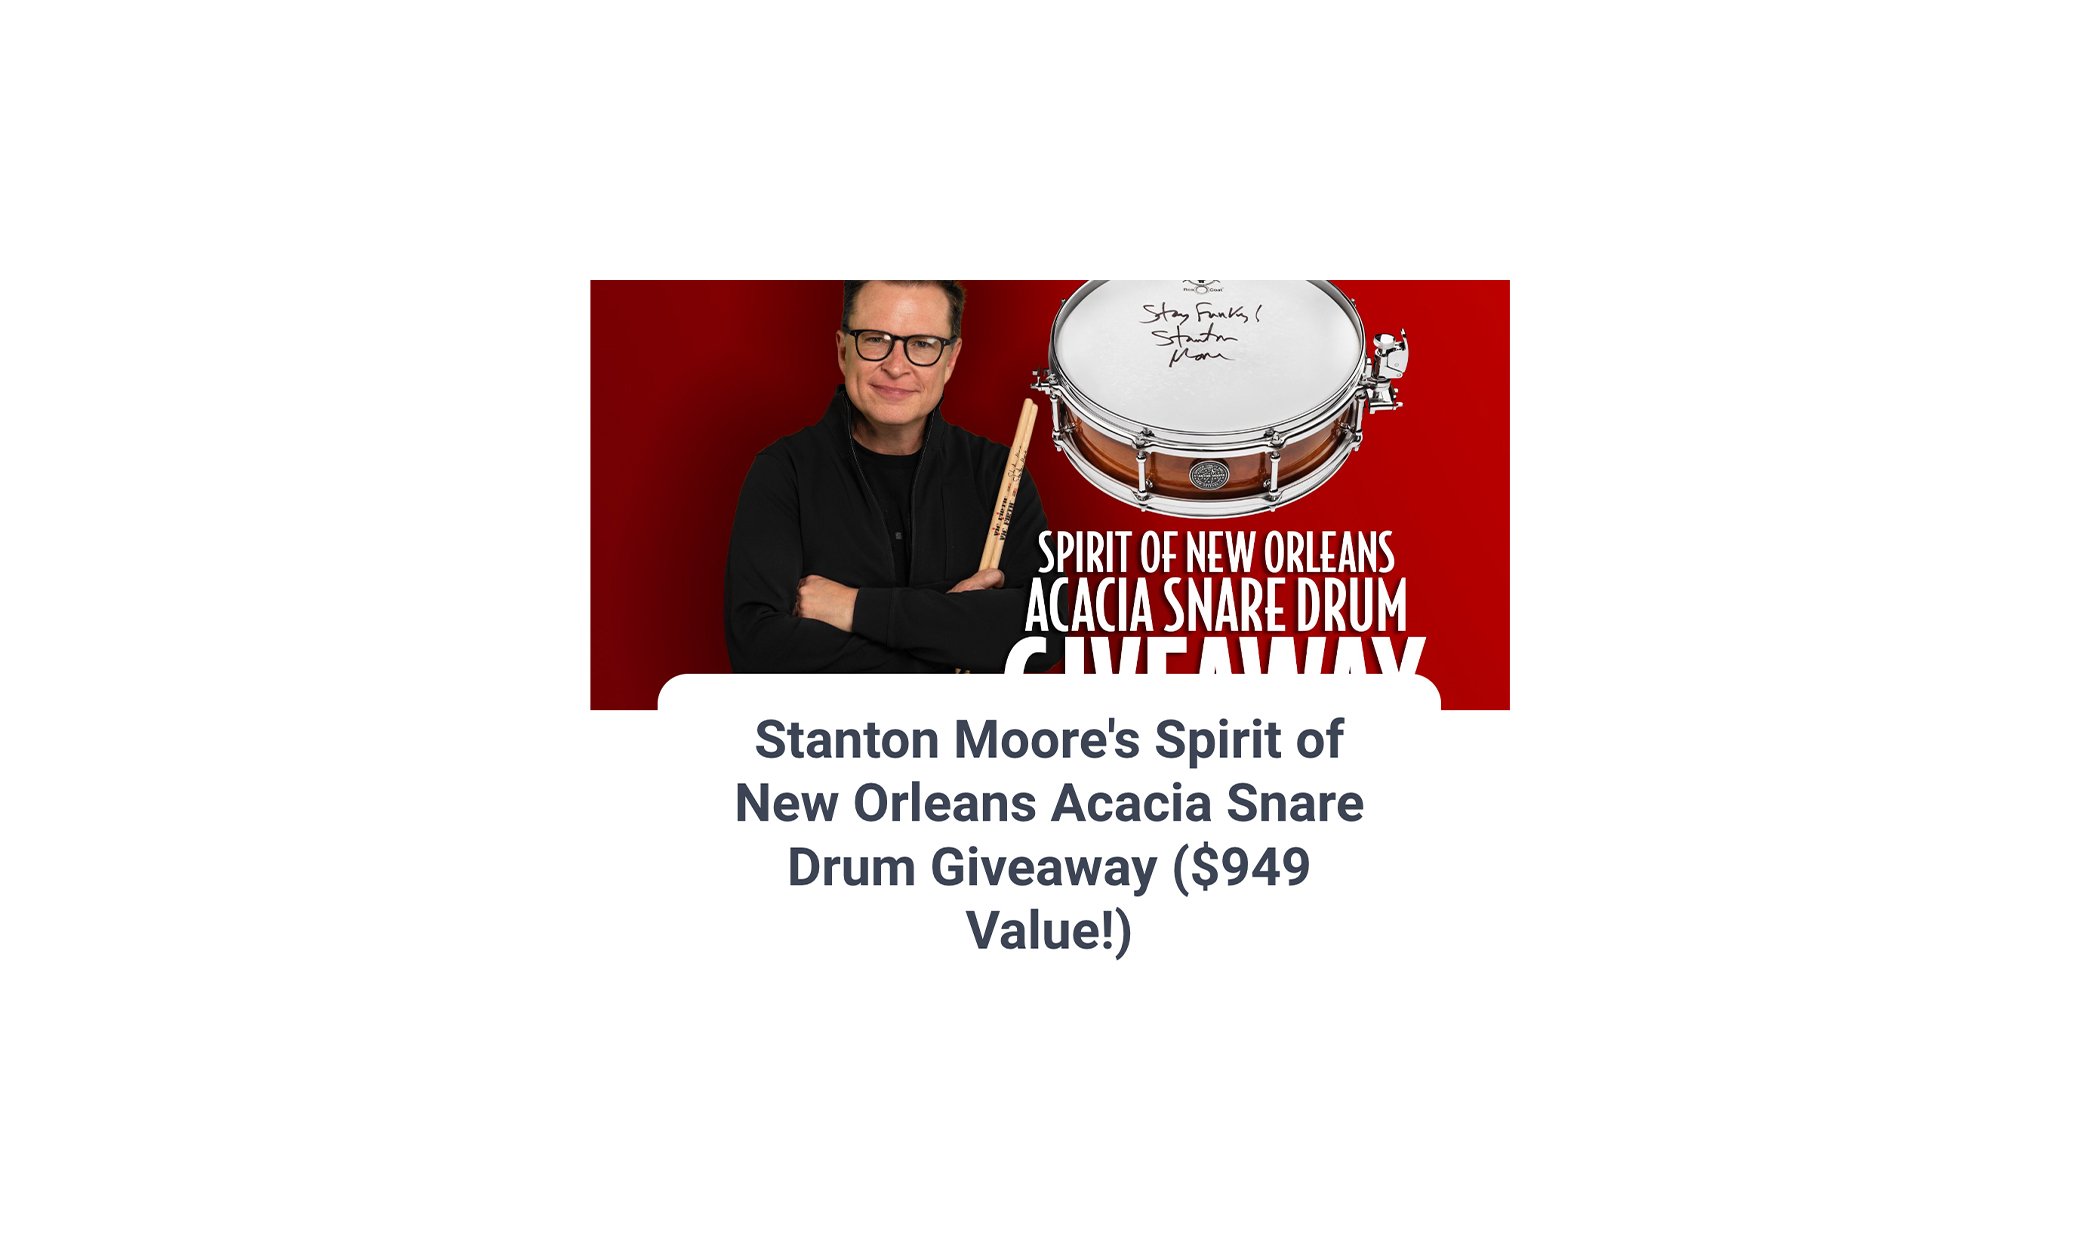 Enter for a Chance to Win a Spirit of New Orleans Acacia Snare Drum!